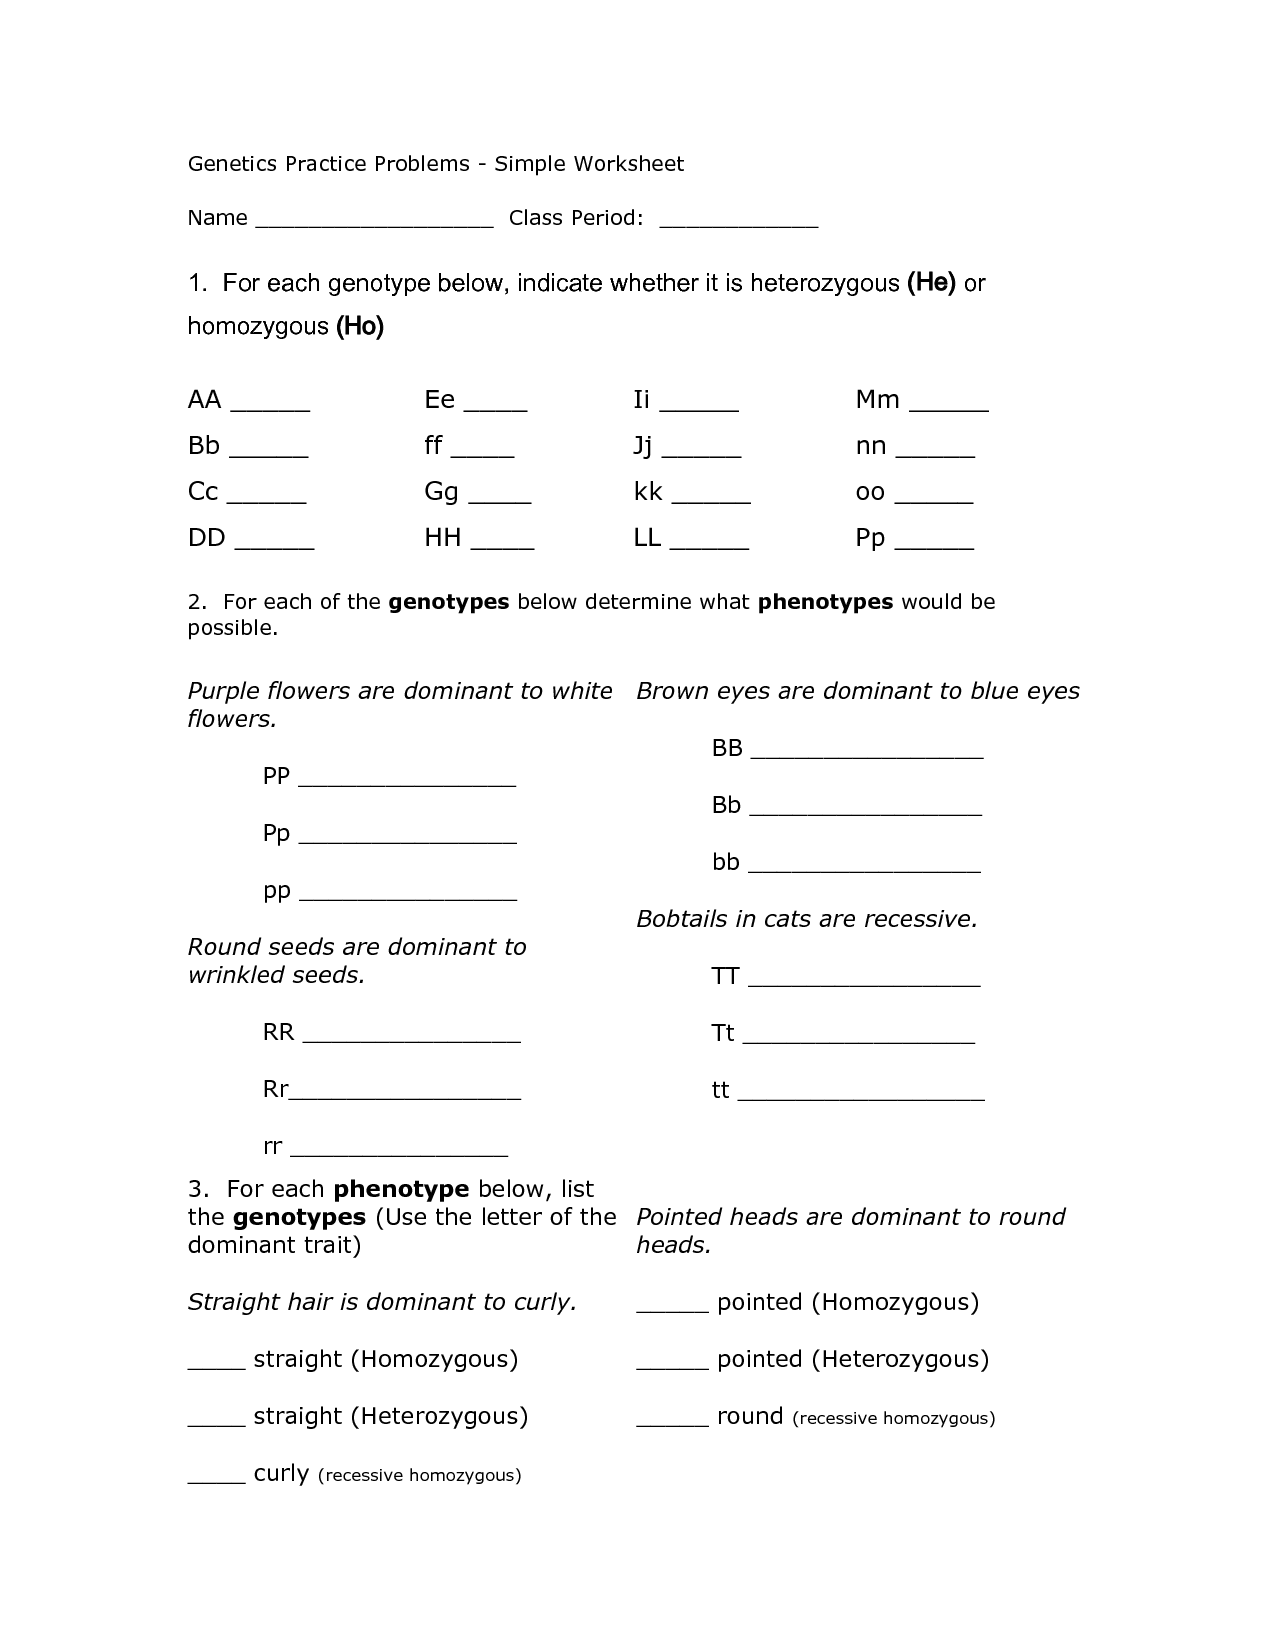 genotypes-and-phenotypes-worksheet-answers